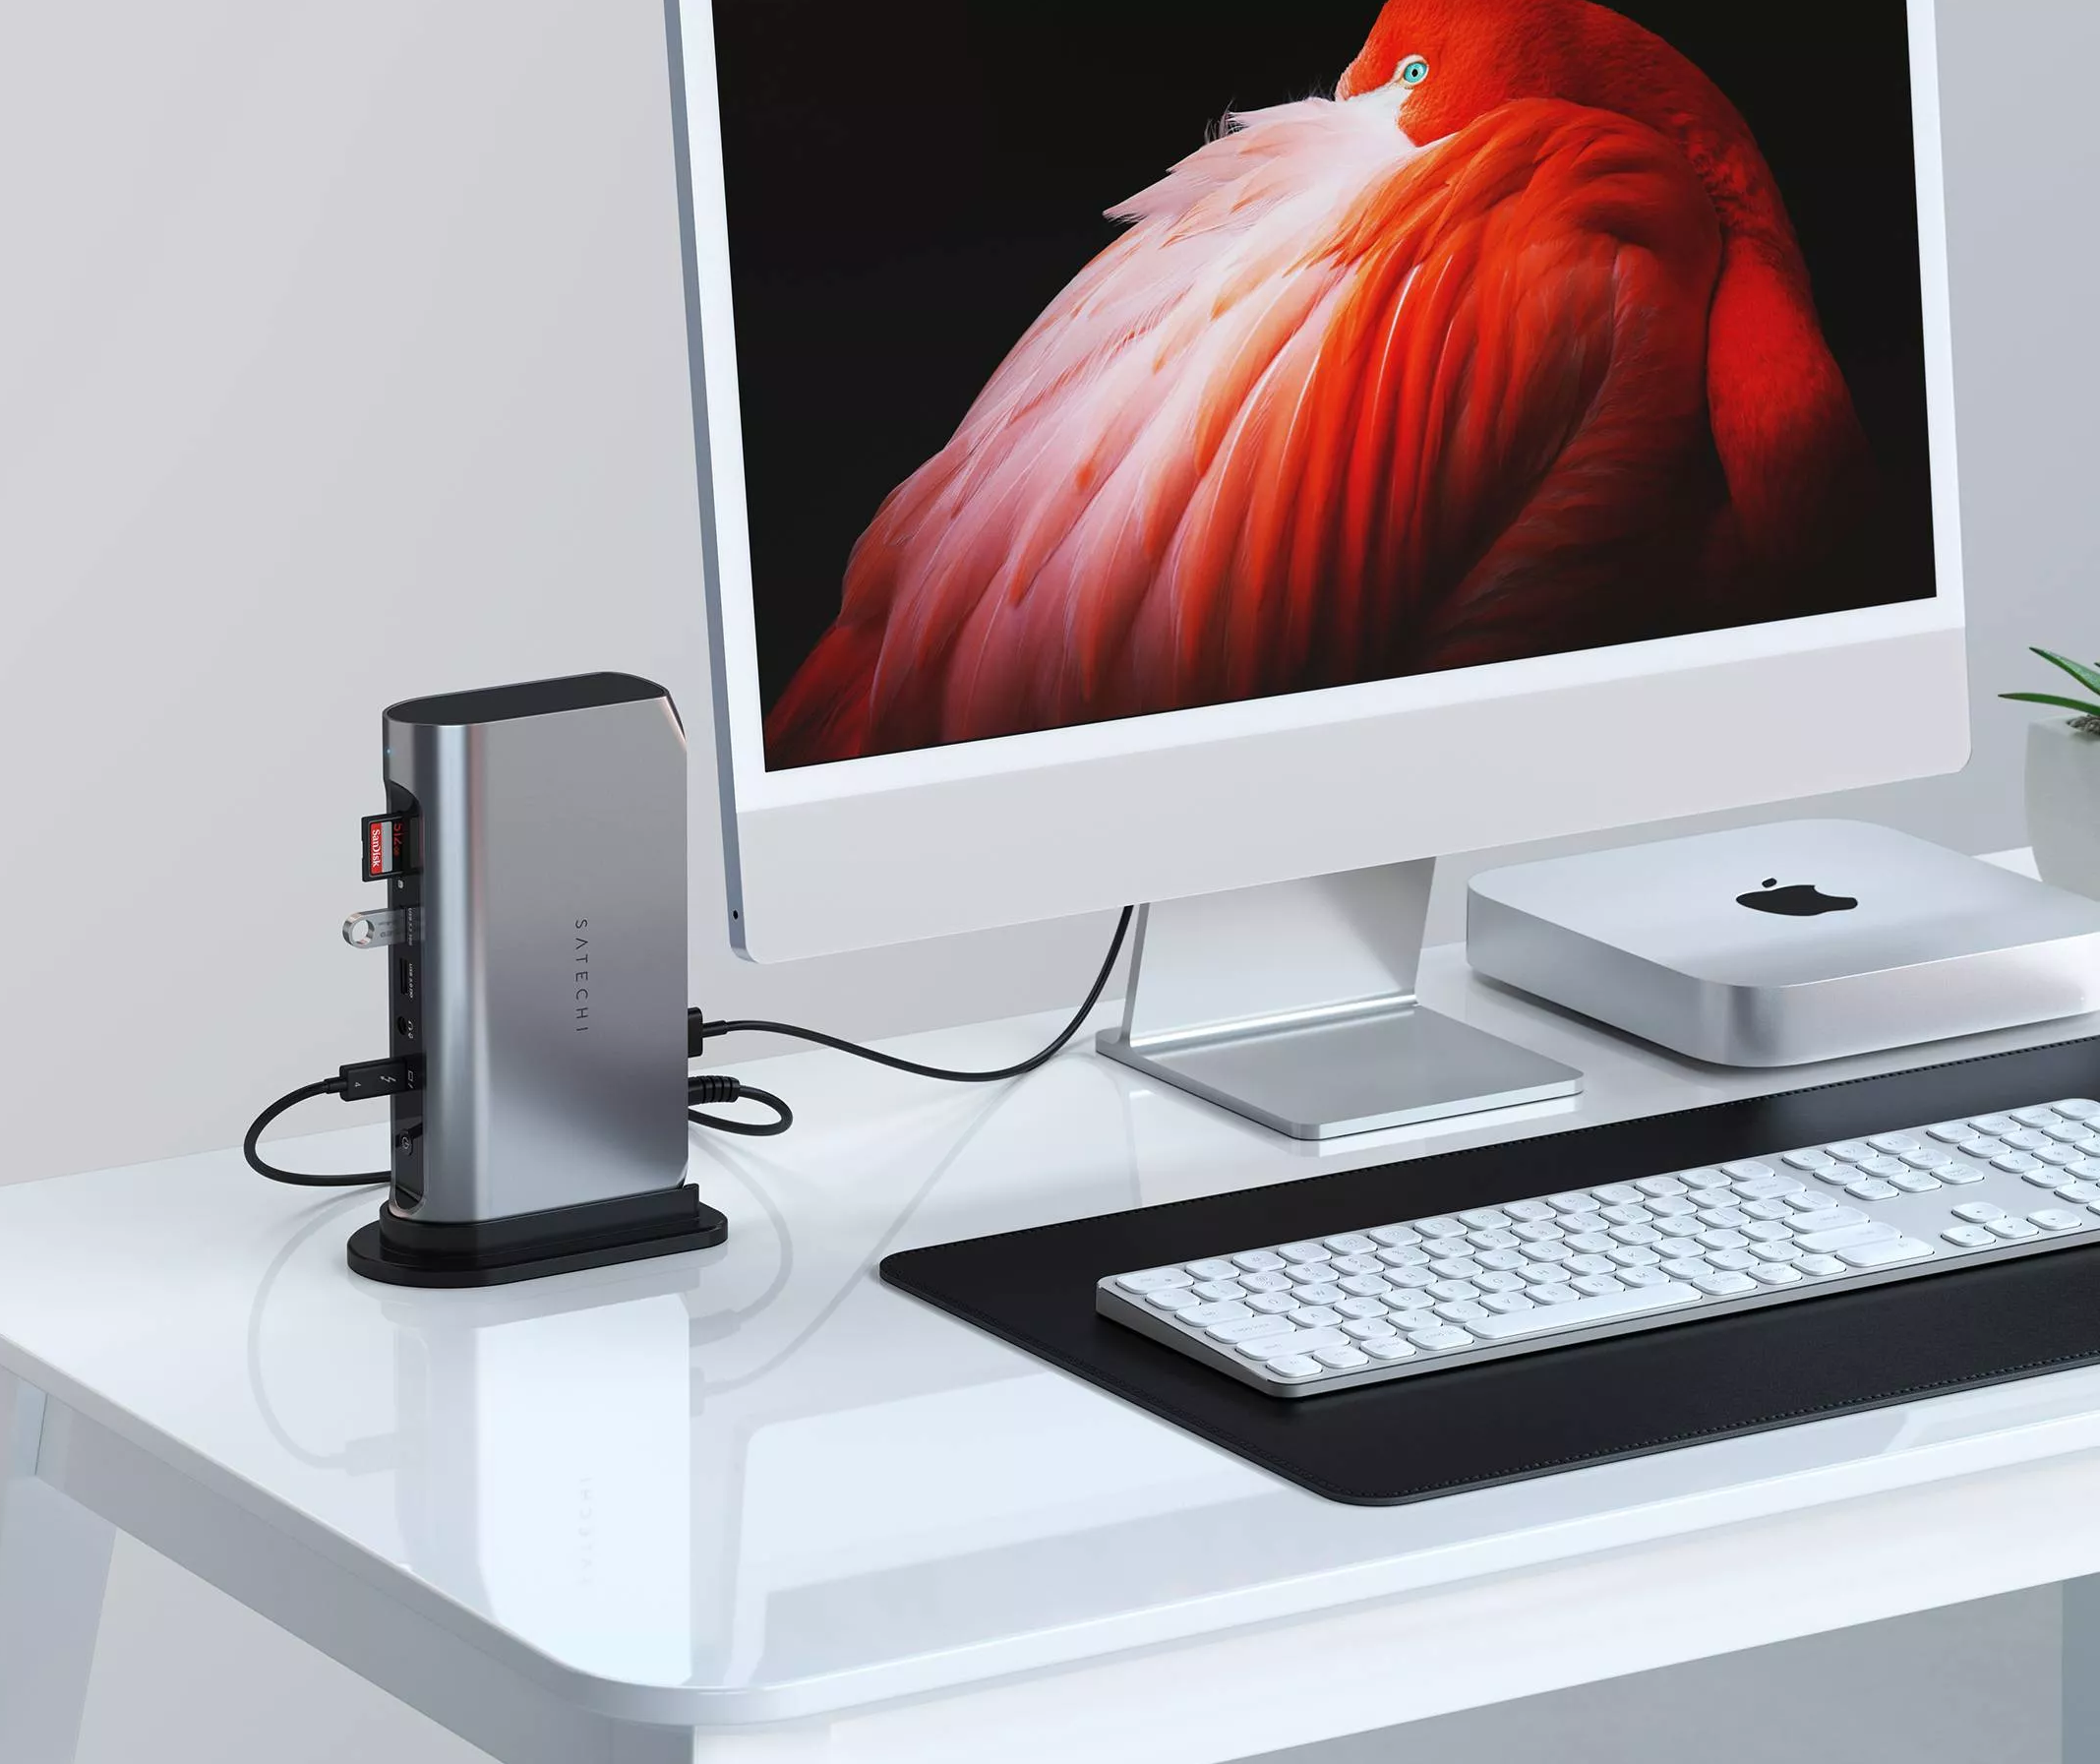 Two Mac computers on the table with the rest tech gadgets and Satechi's Multimedia Dock